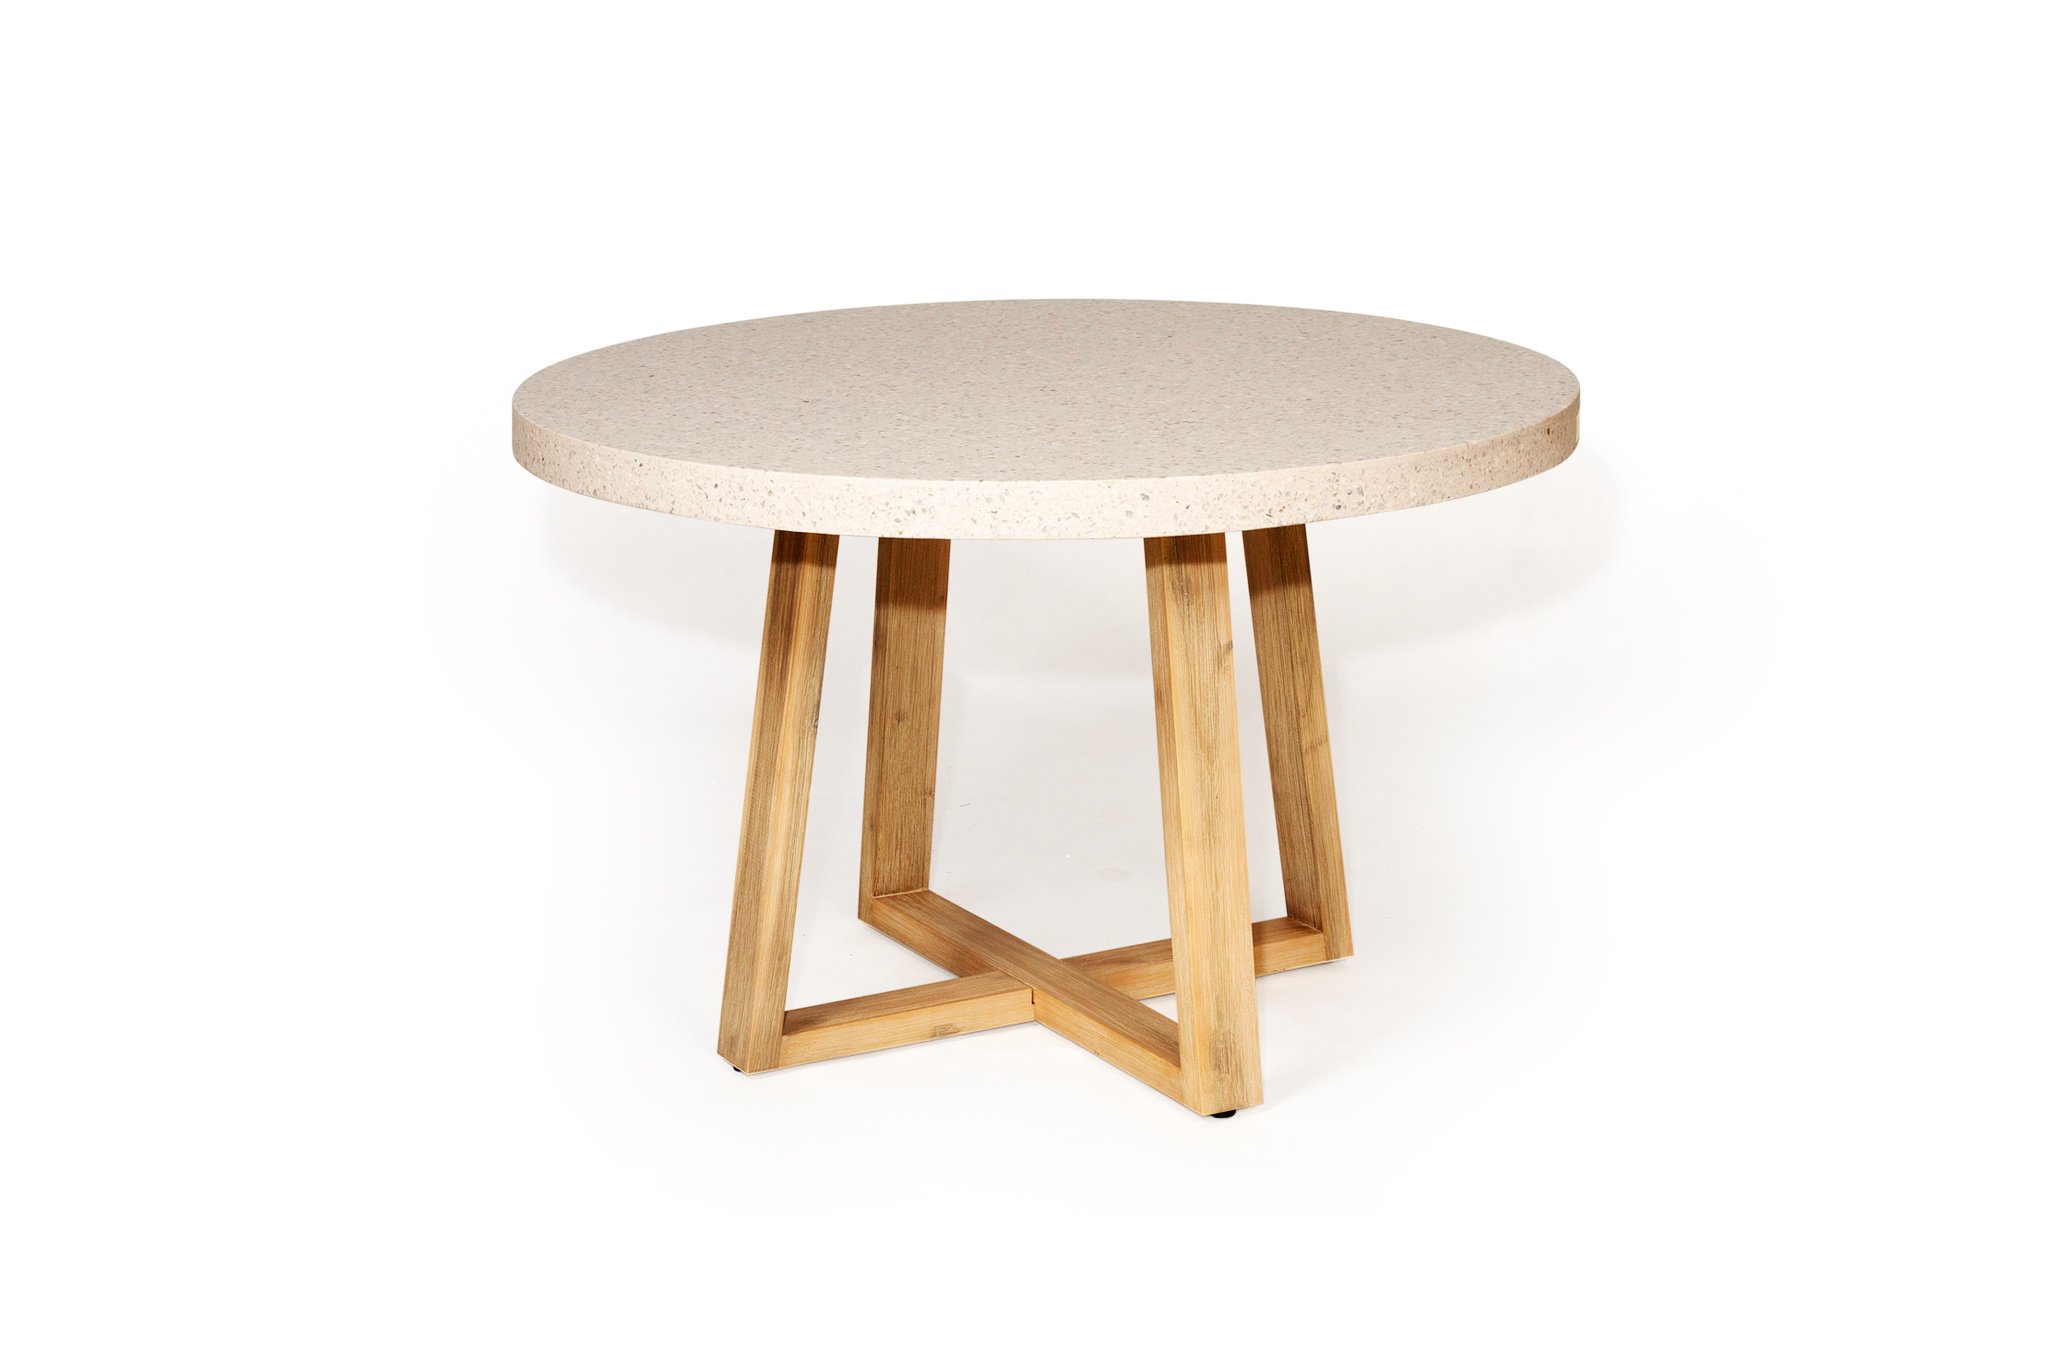 1.2m eTerrazzo Elkstone Round Dining Table - Ivory Coast with Ivory Washed Legs